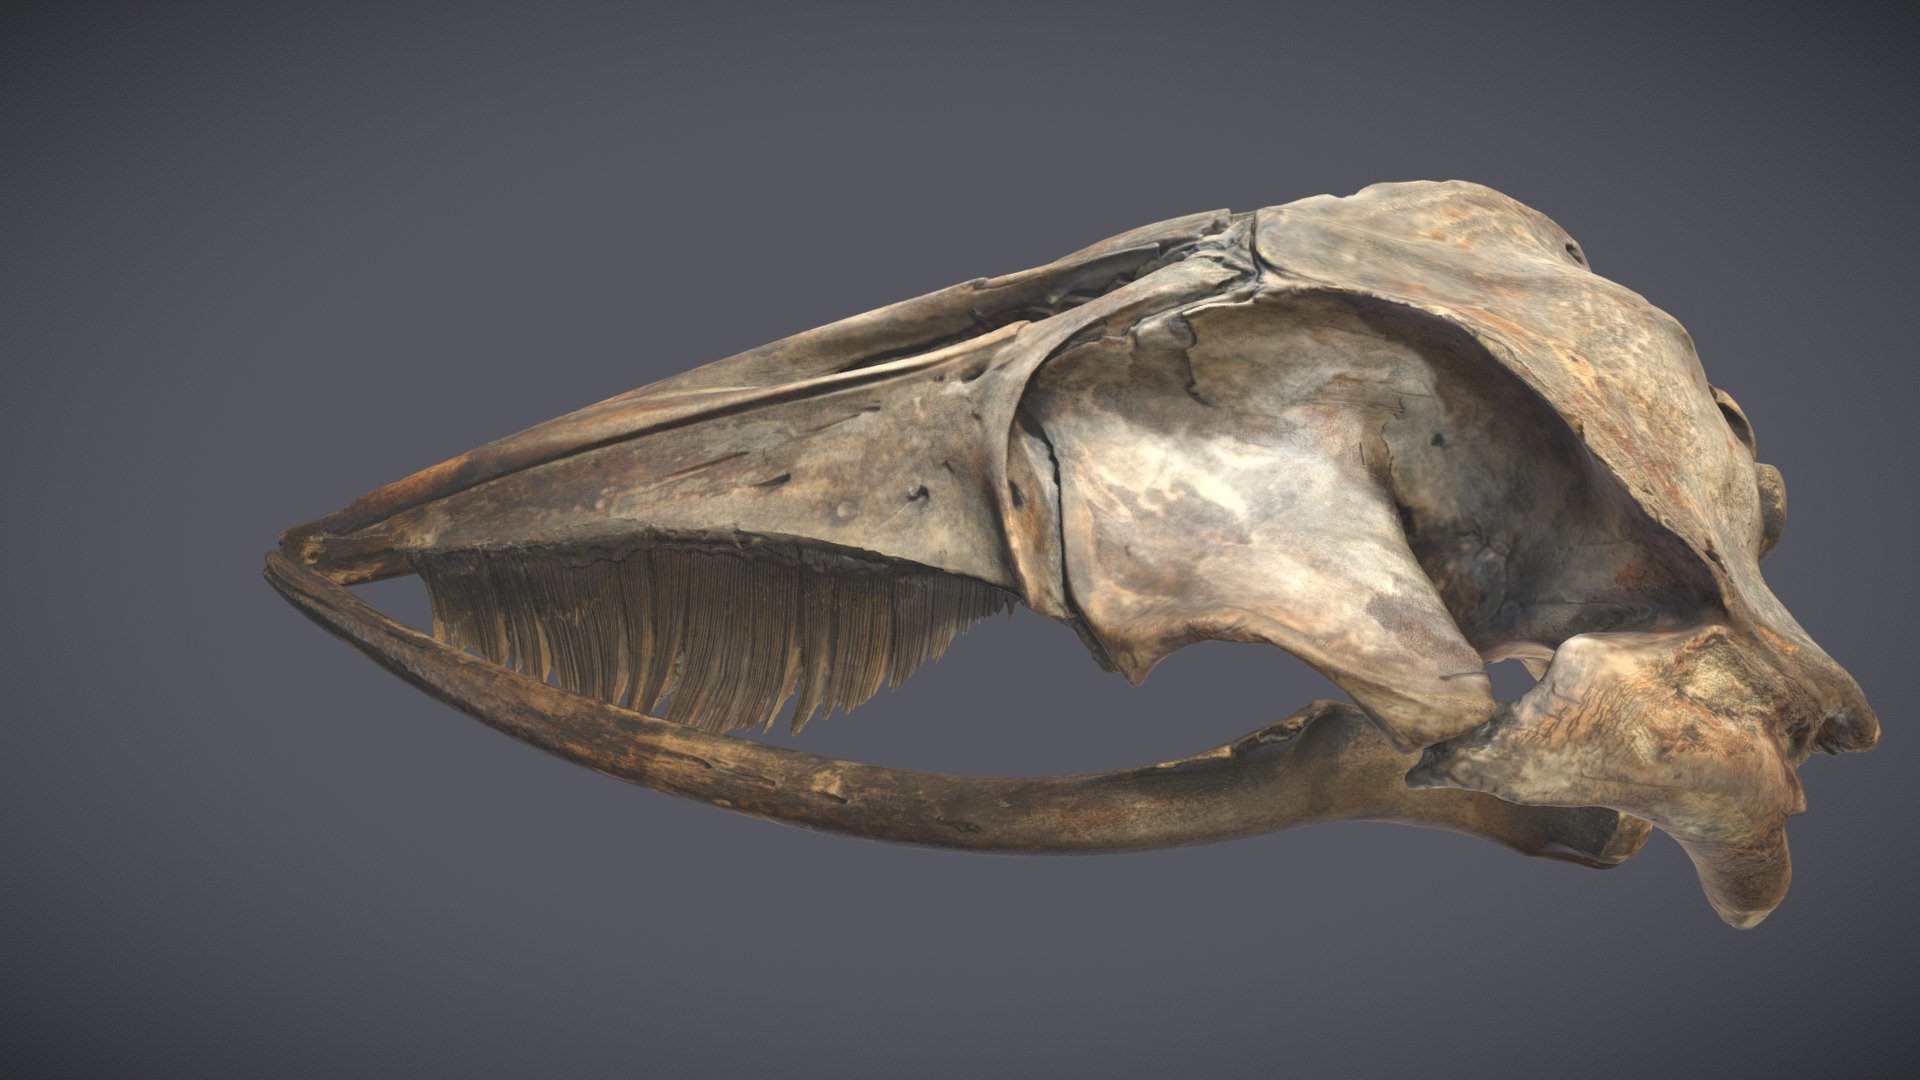 Original from Hull Martime Museum
Photogrammety scanned by S Dey, ThinkSee3D Ltd, March 21 - Minkie Whale Skull & Mandible - 3D model by ThinkSee3D 3d model